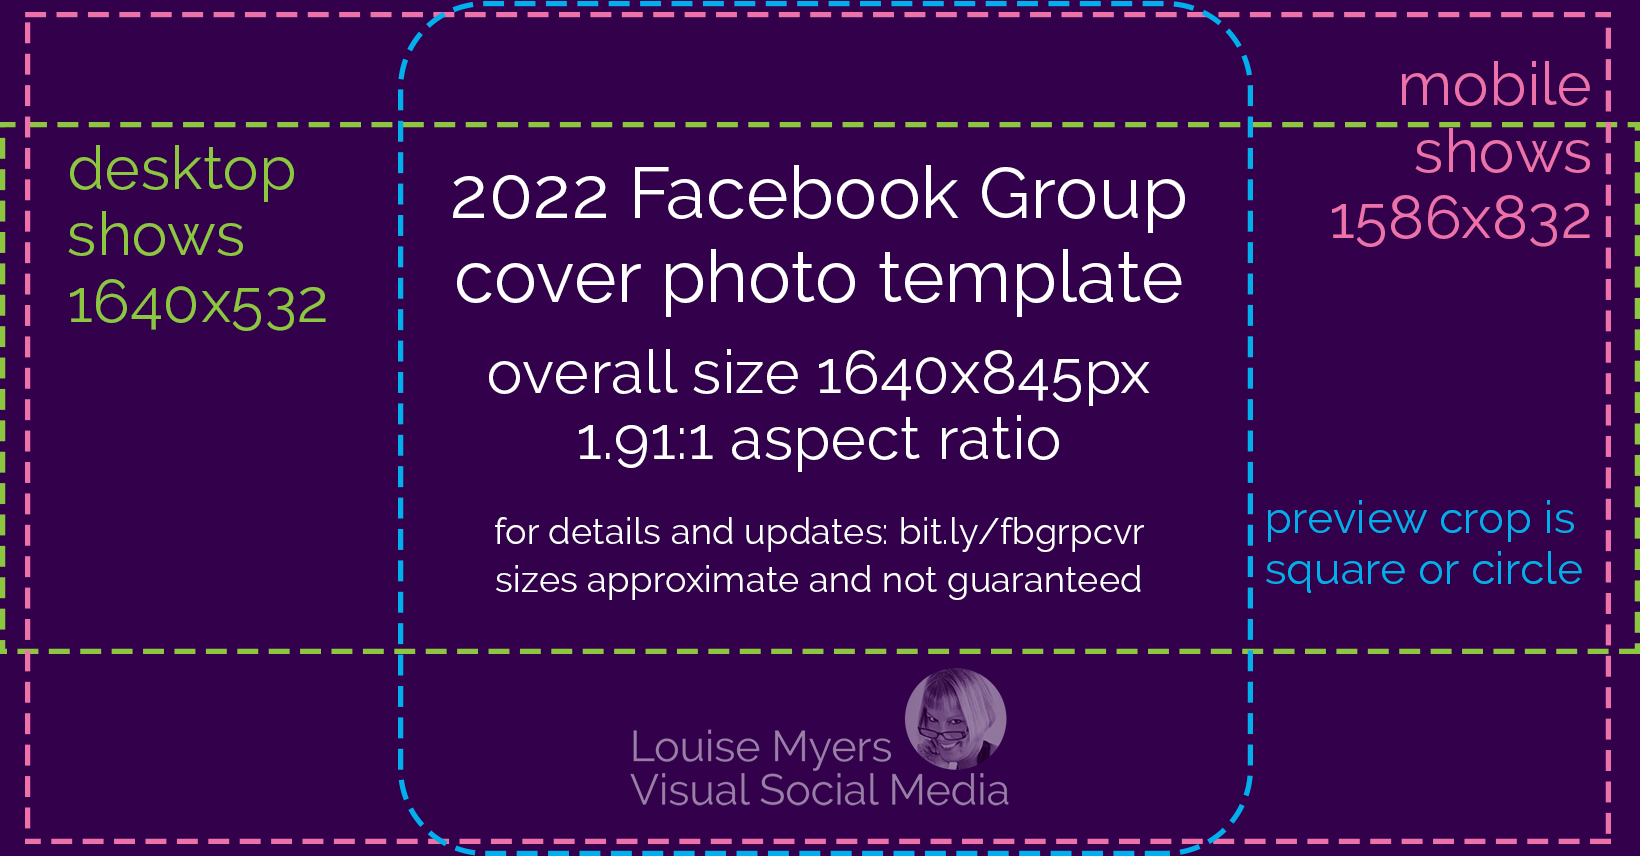 Facebook Group Cover Photo template for 2022